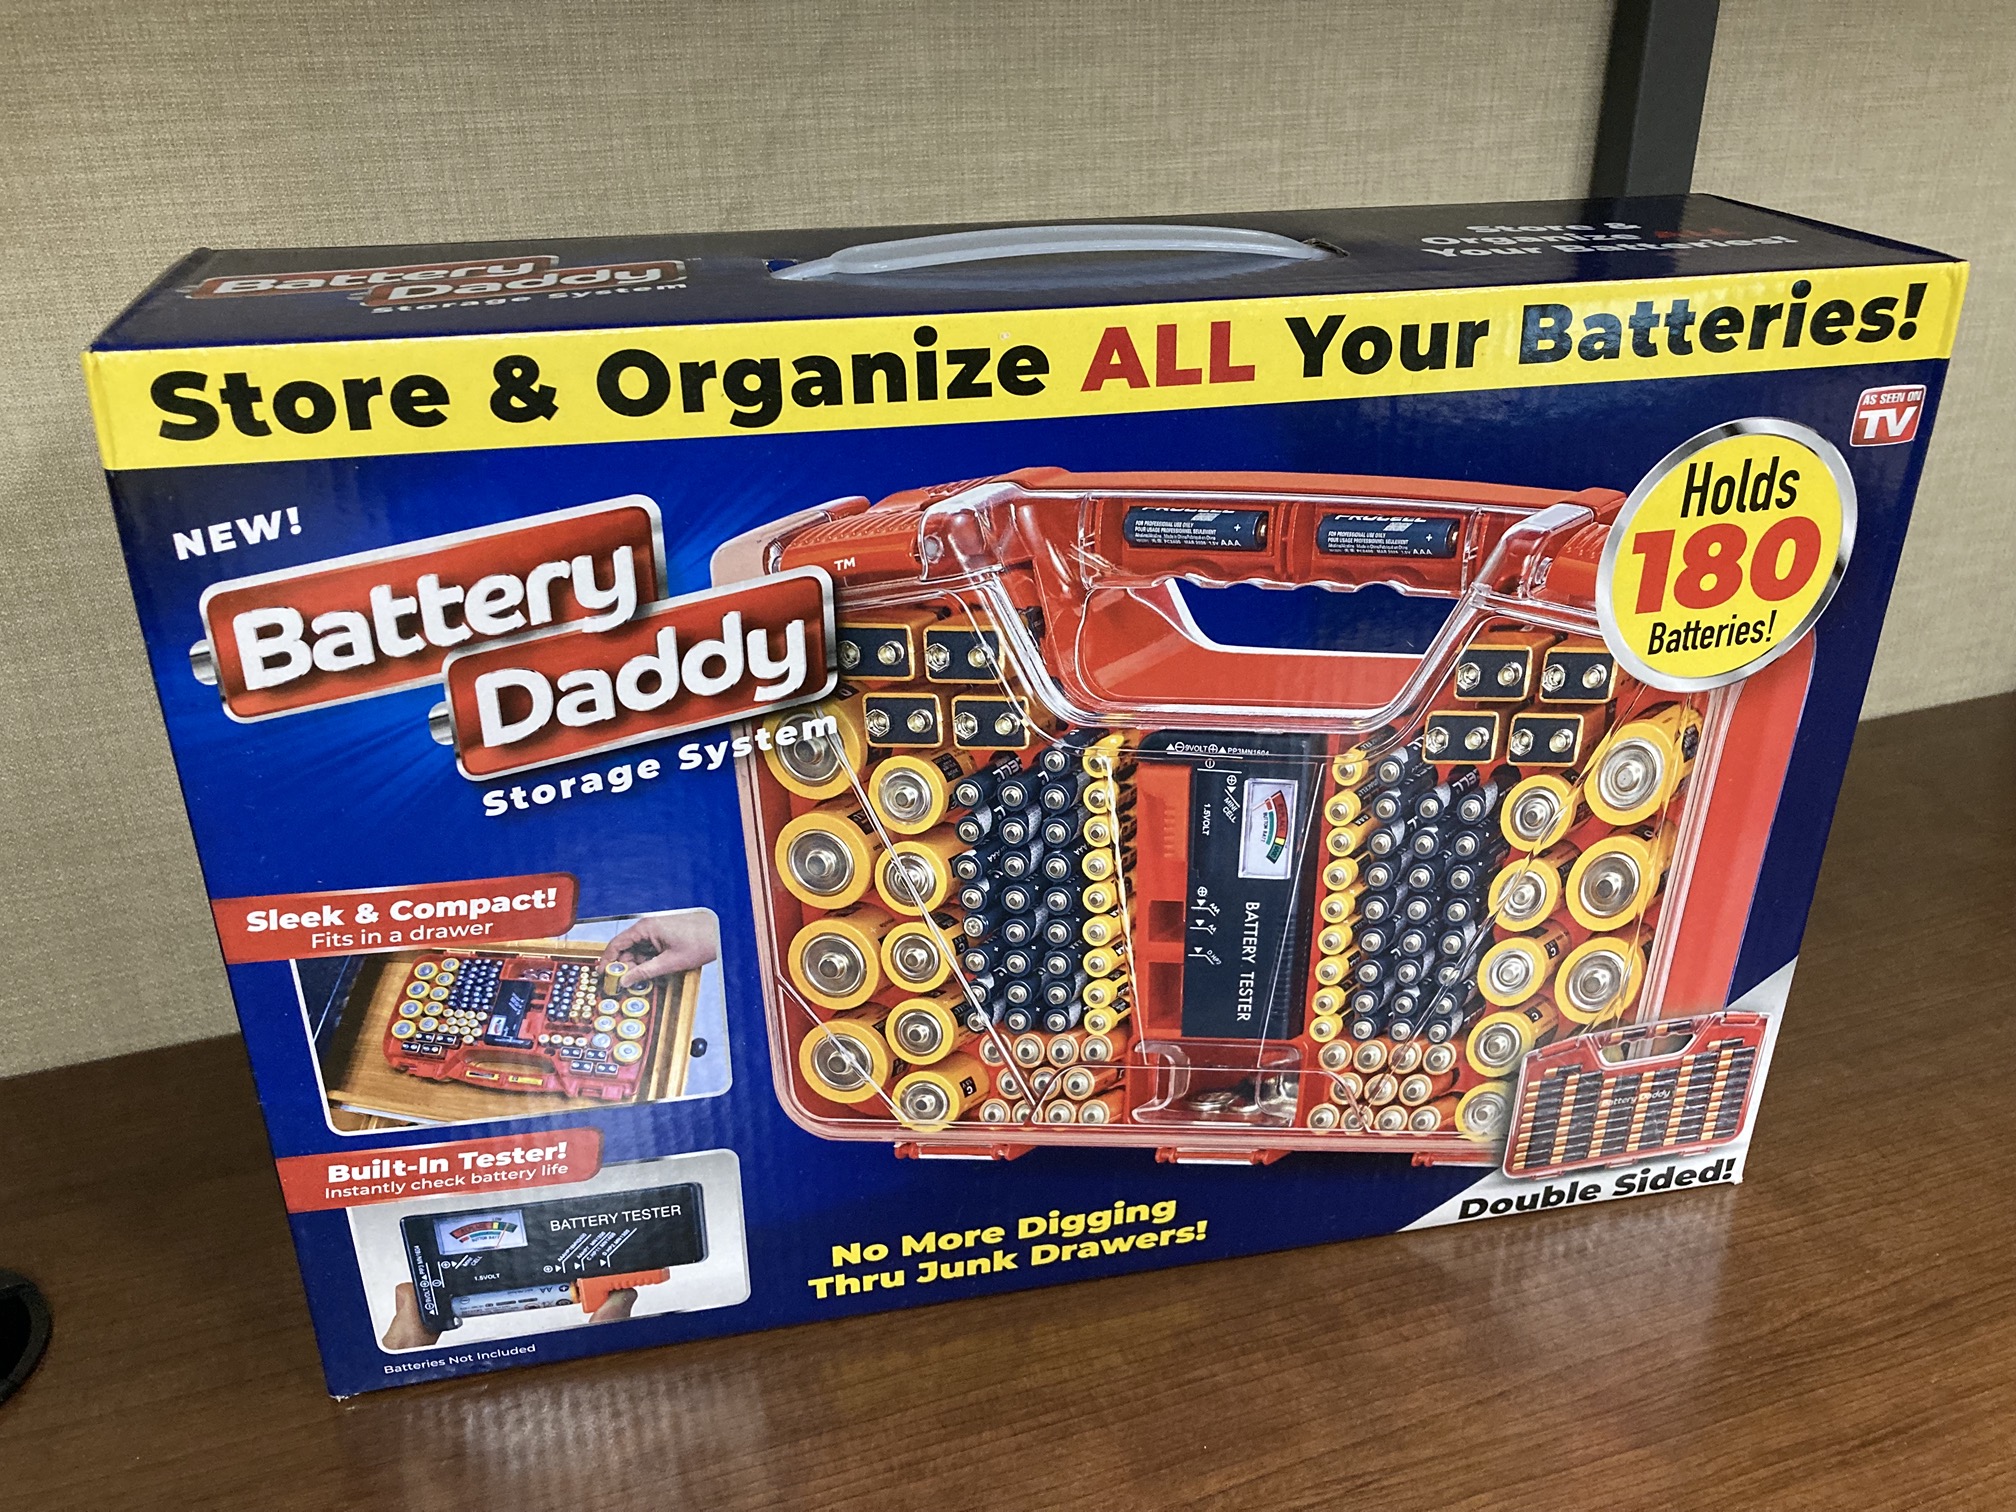 Dewalt DC9310 Battery Charger and Black and Decker Firestorm Batteries –  Press Any Key